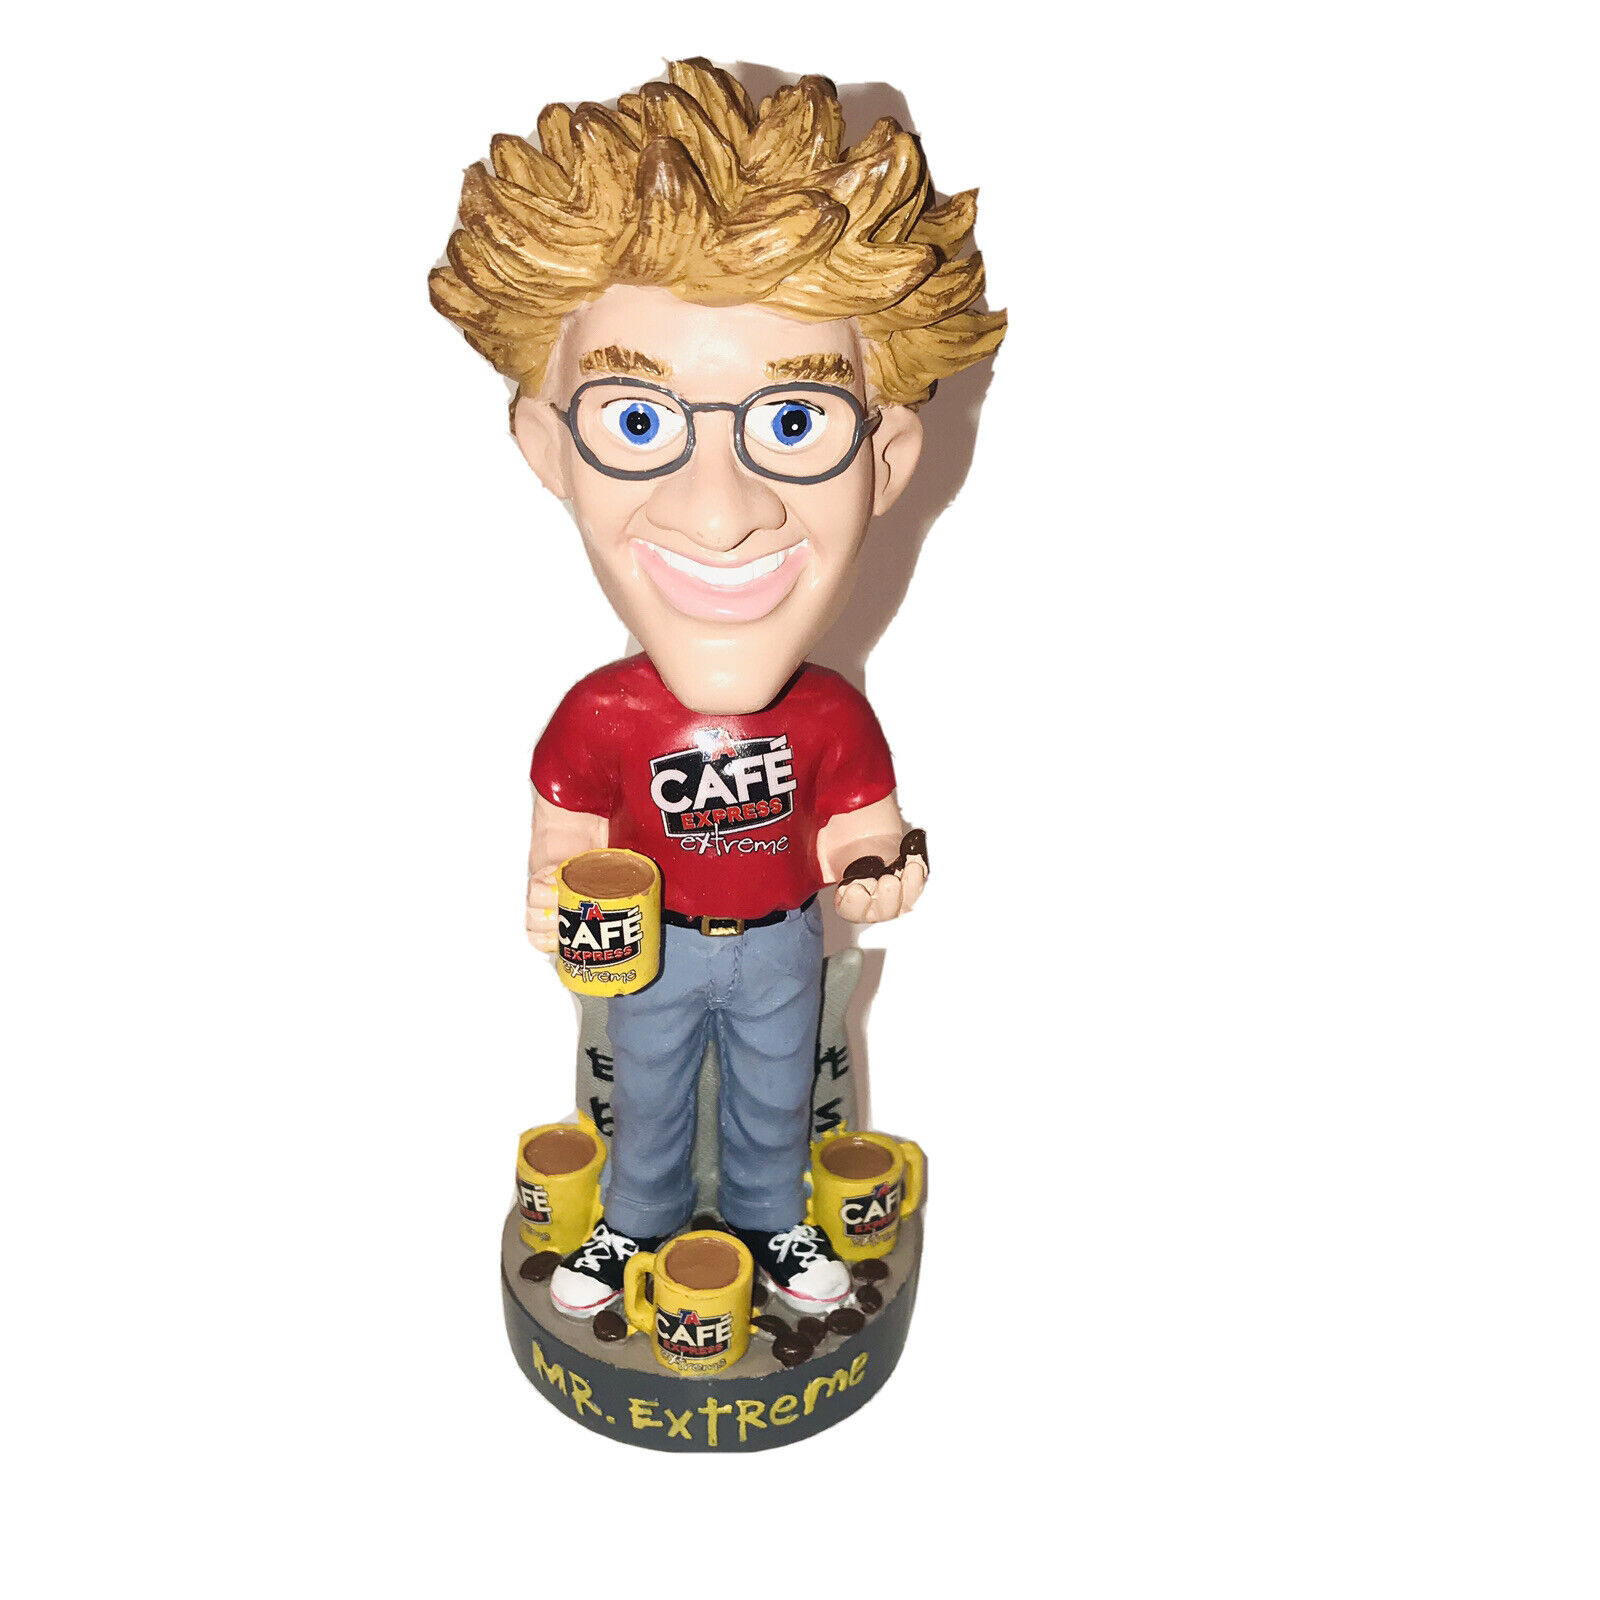 Mr. Extreme Bobblehead From Ta Cafe Express Truck Stop W/box